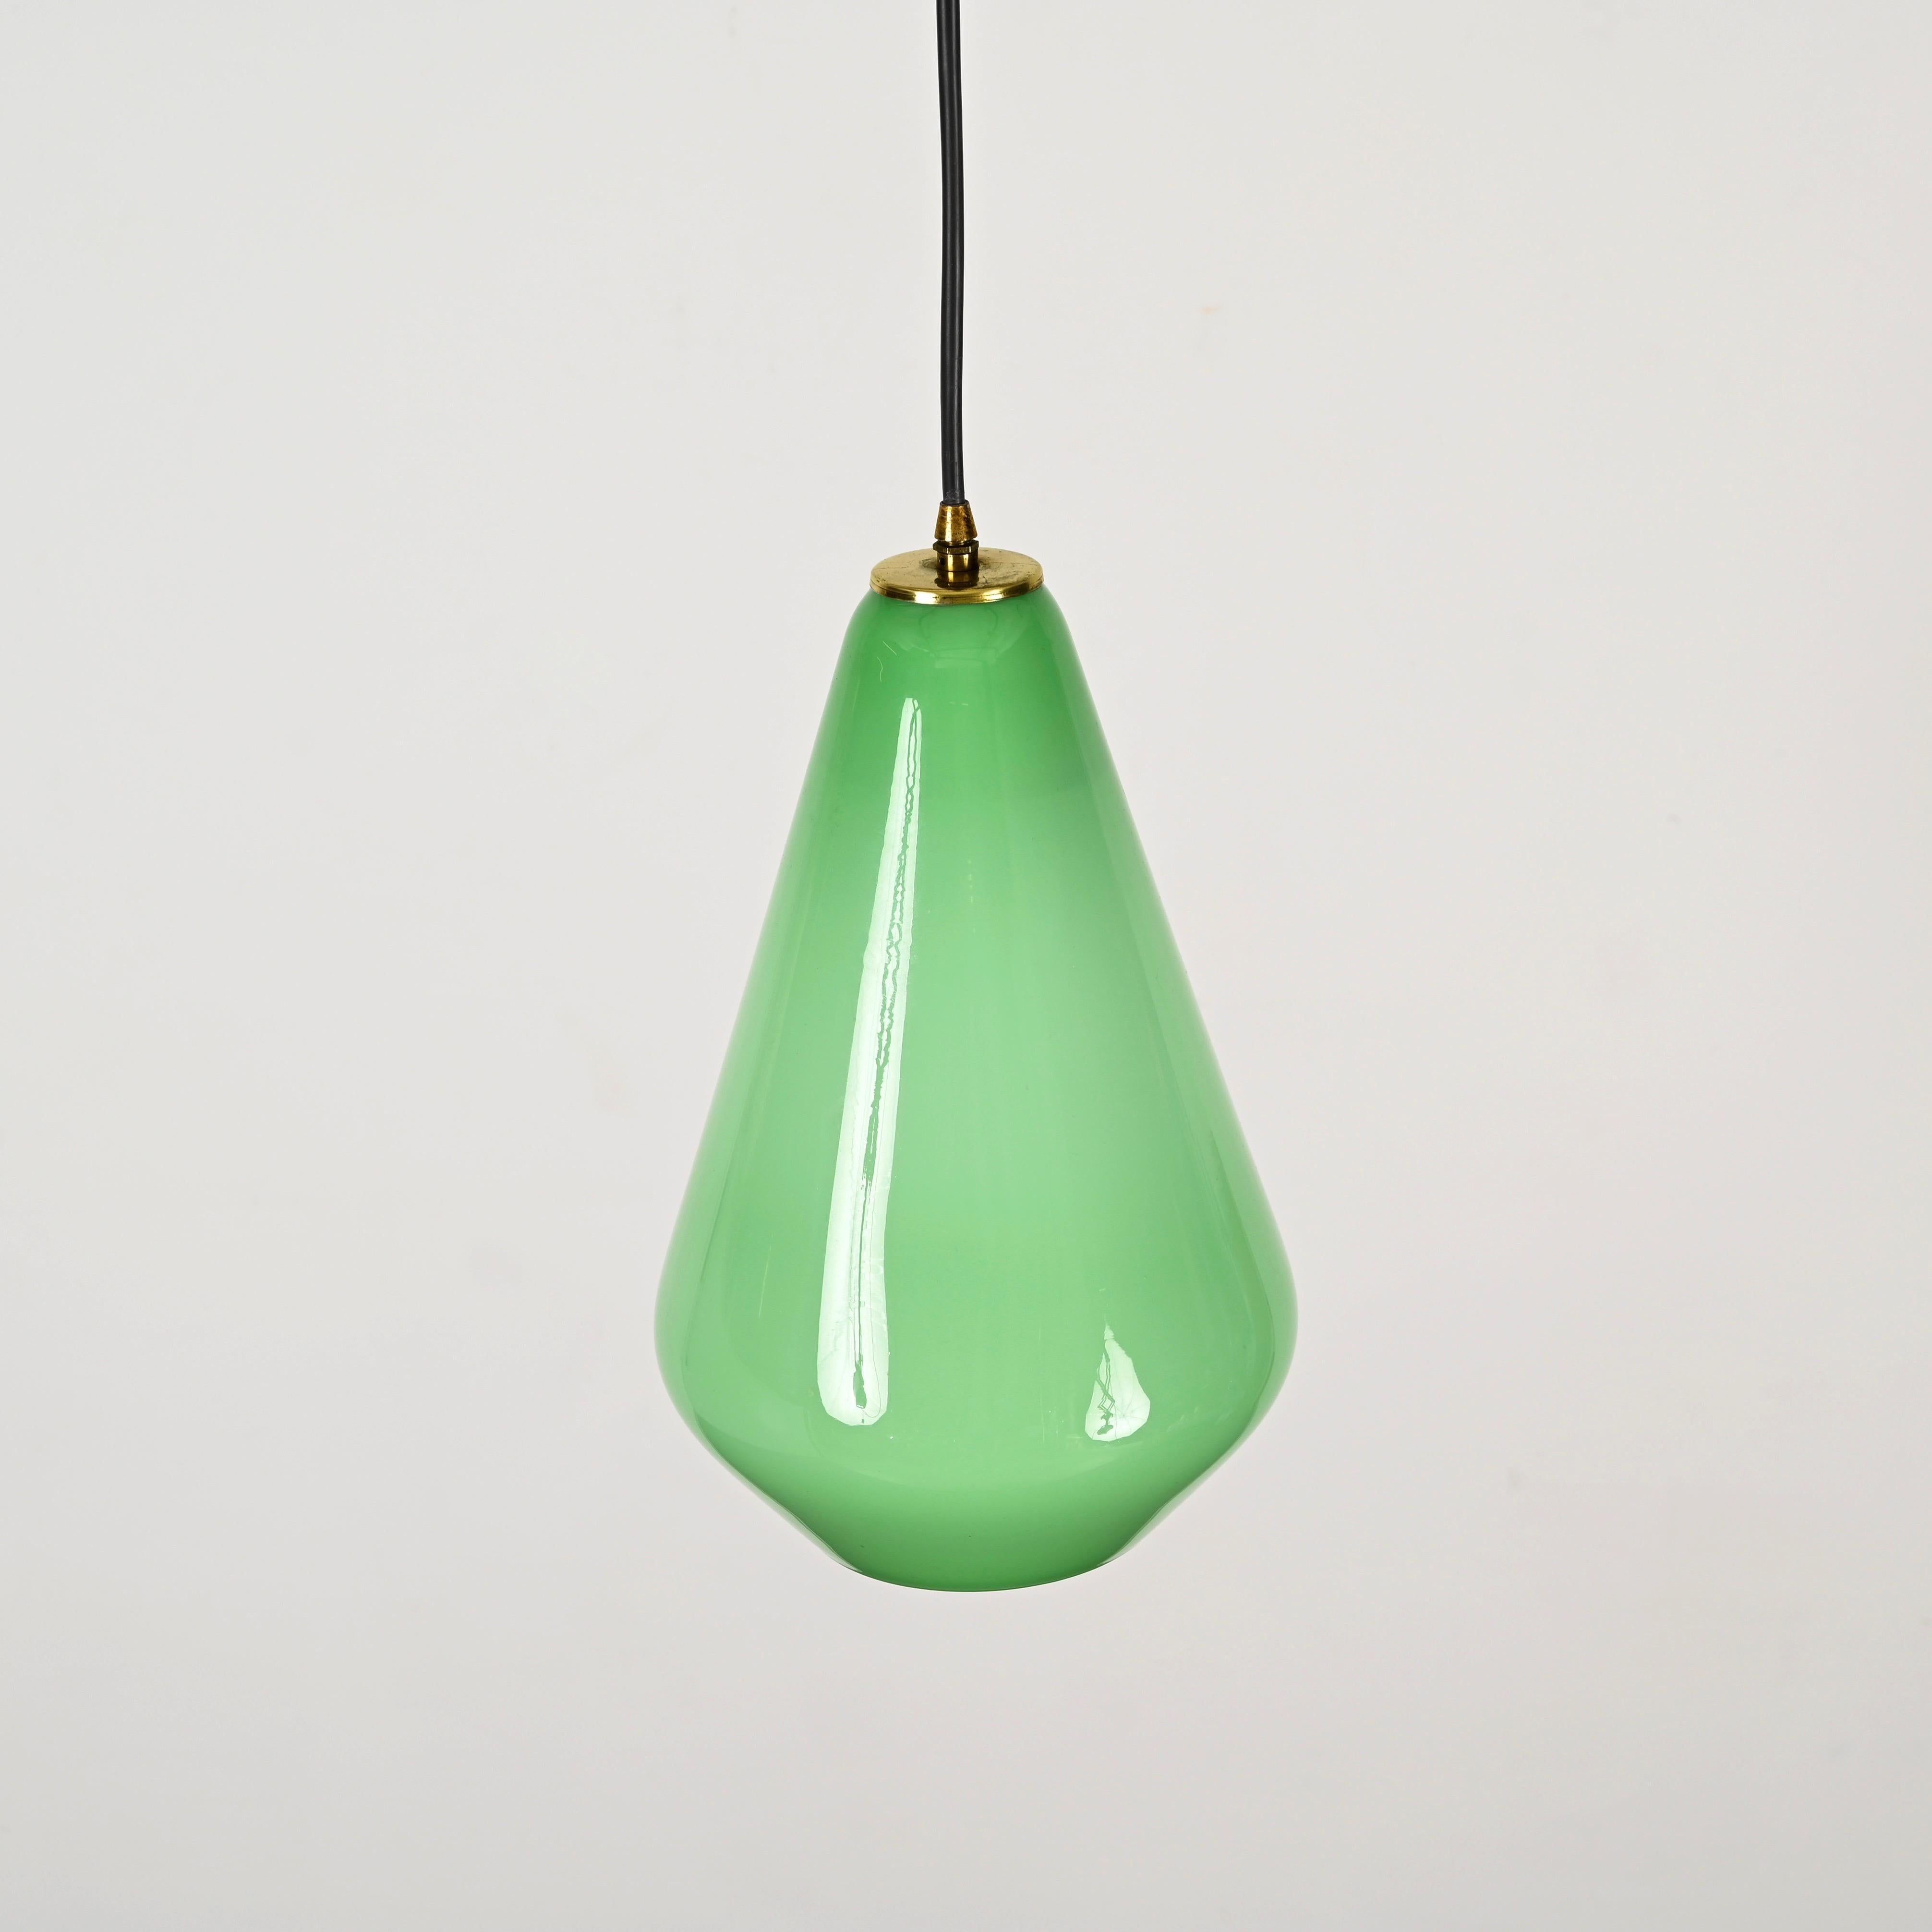 20th Century Green Murano Cased Glass and Brass Pendant Chandelier by Stilnovo, Italy 1950s For Sale